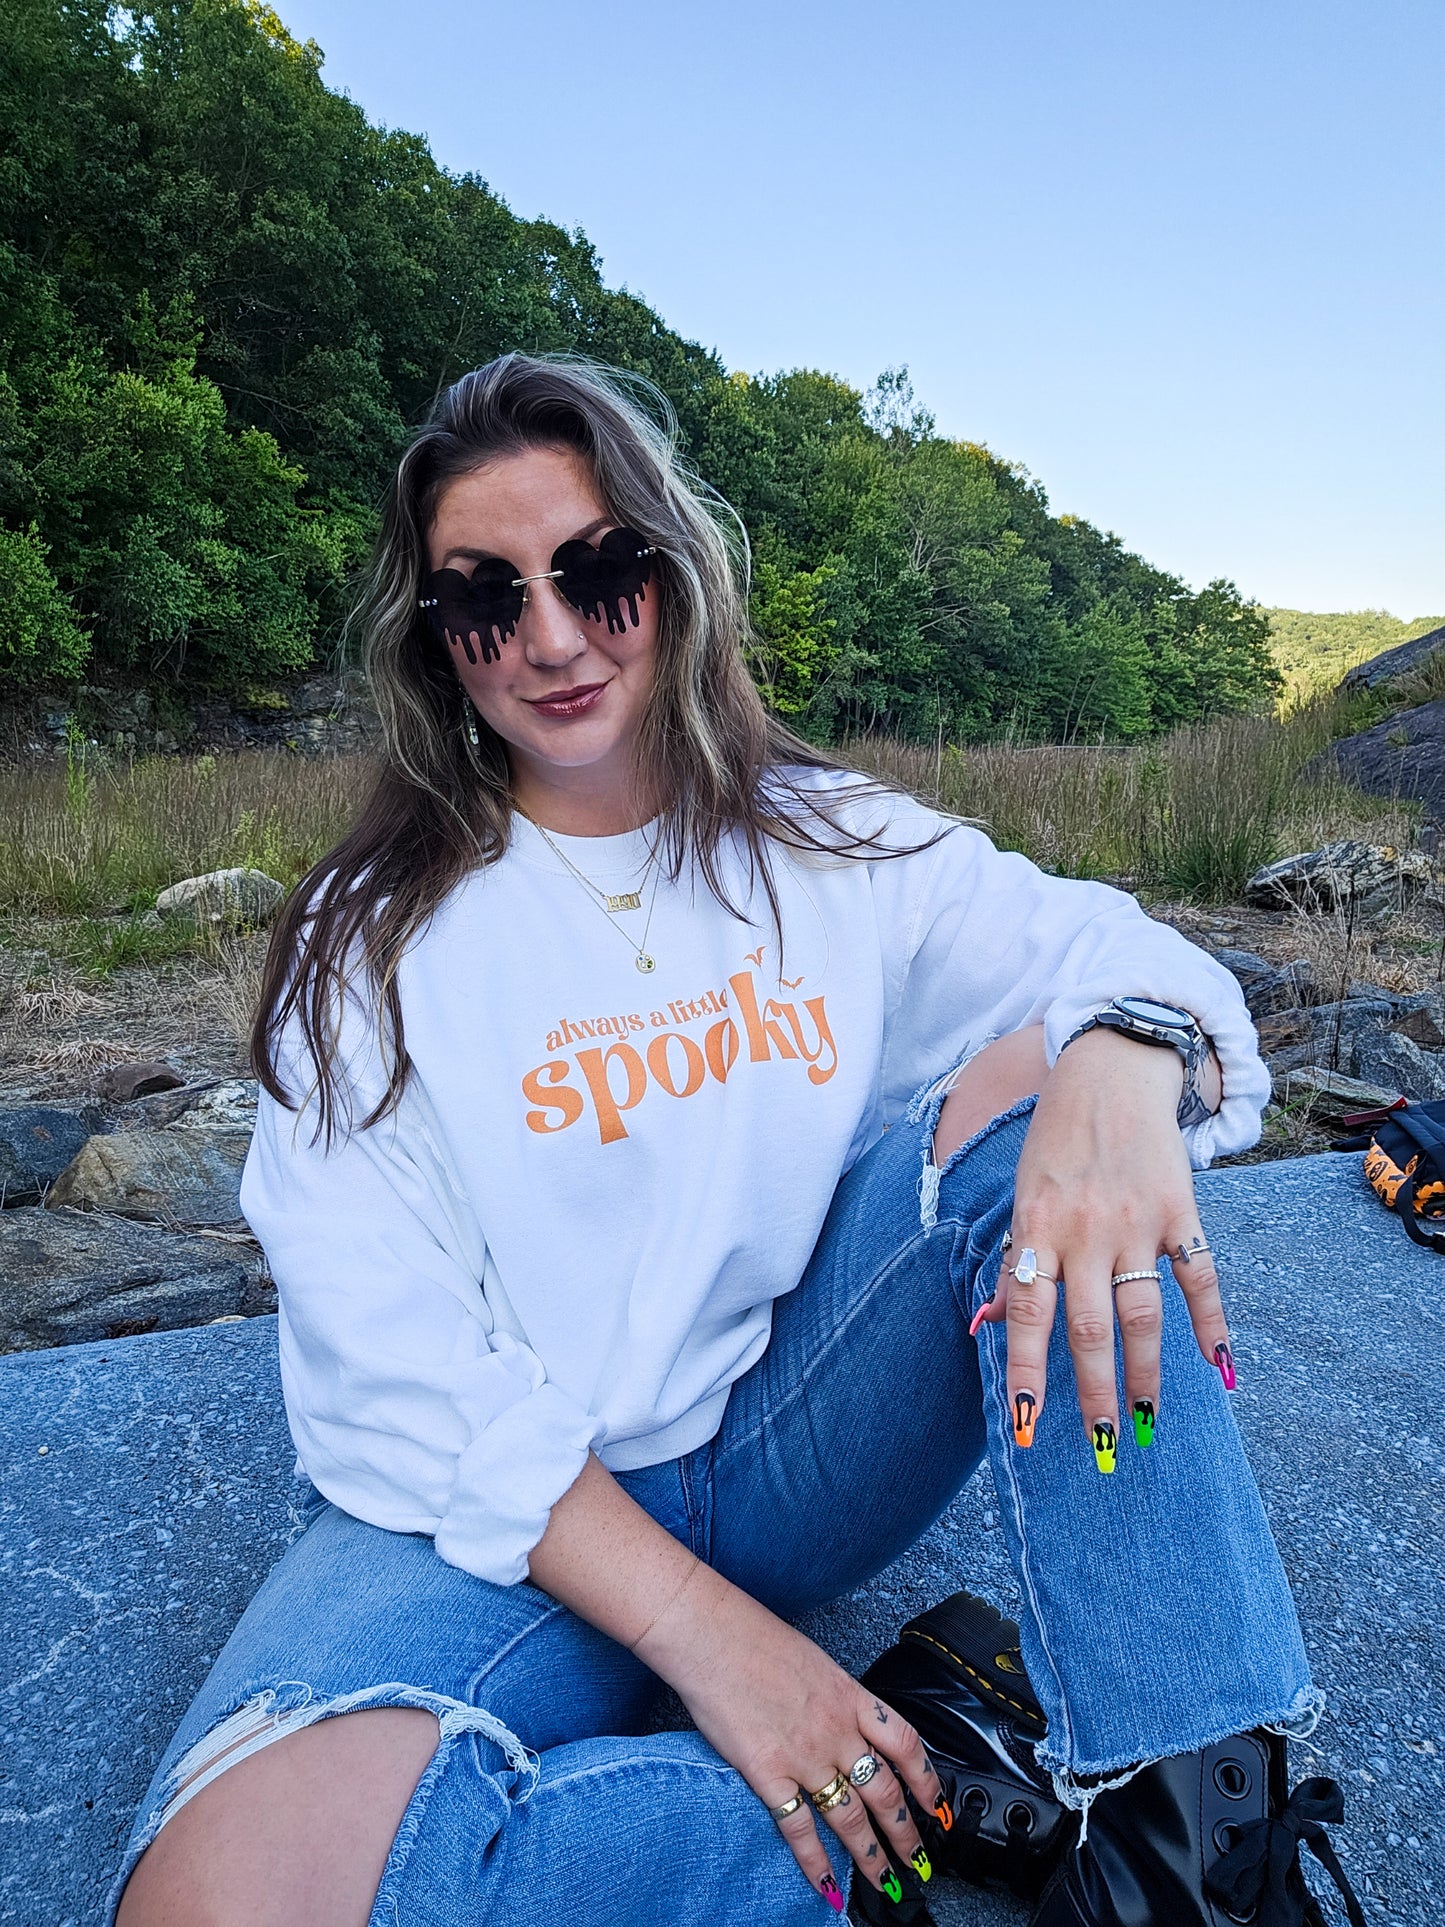 A girl wearing ripped jeans, Dr. Marten boots, black sunglasses, and a white Halloween crewneck sweatshirt that says "always a little spooky" in a trendy orange font